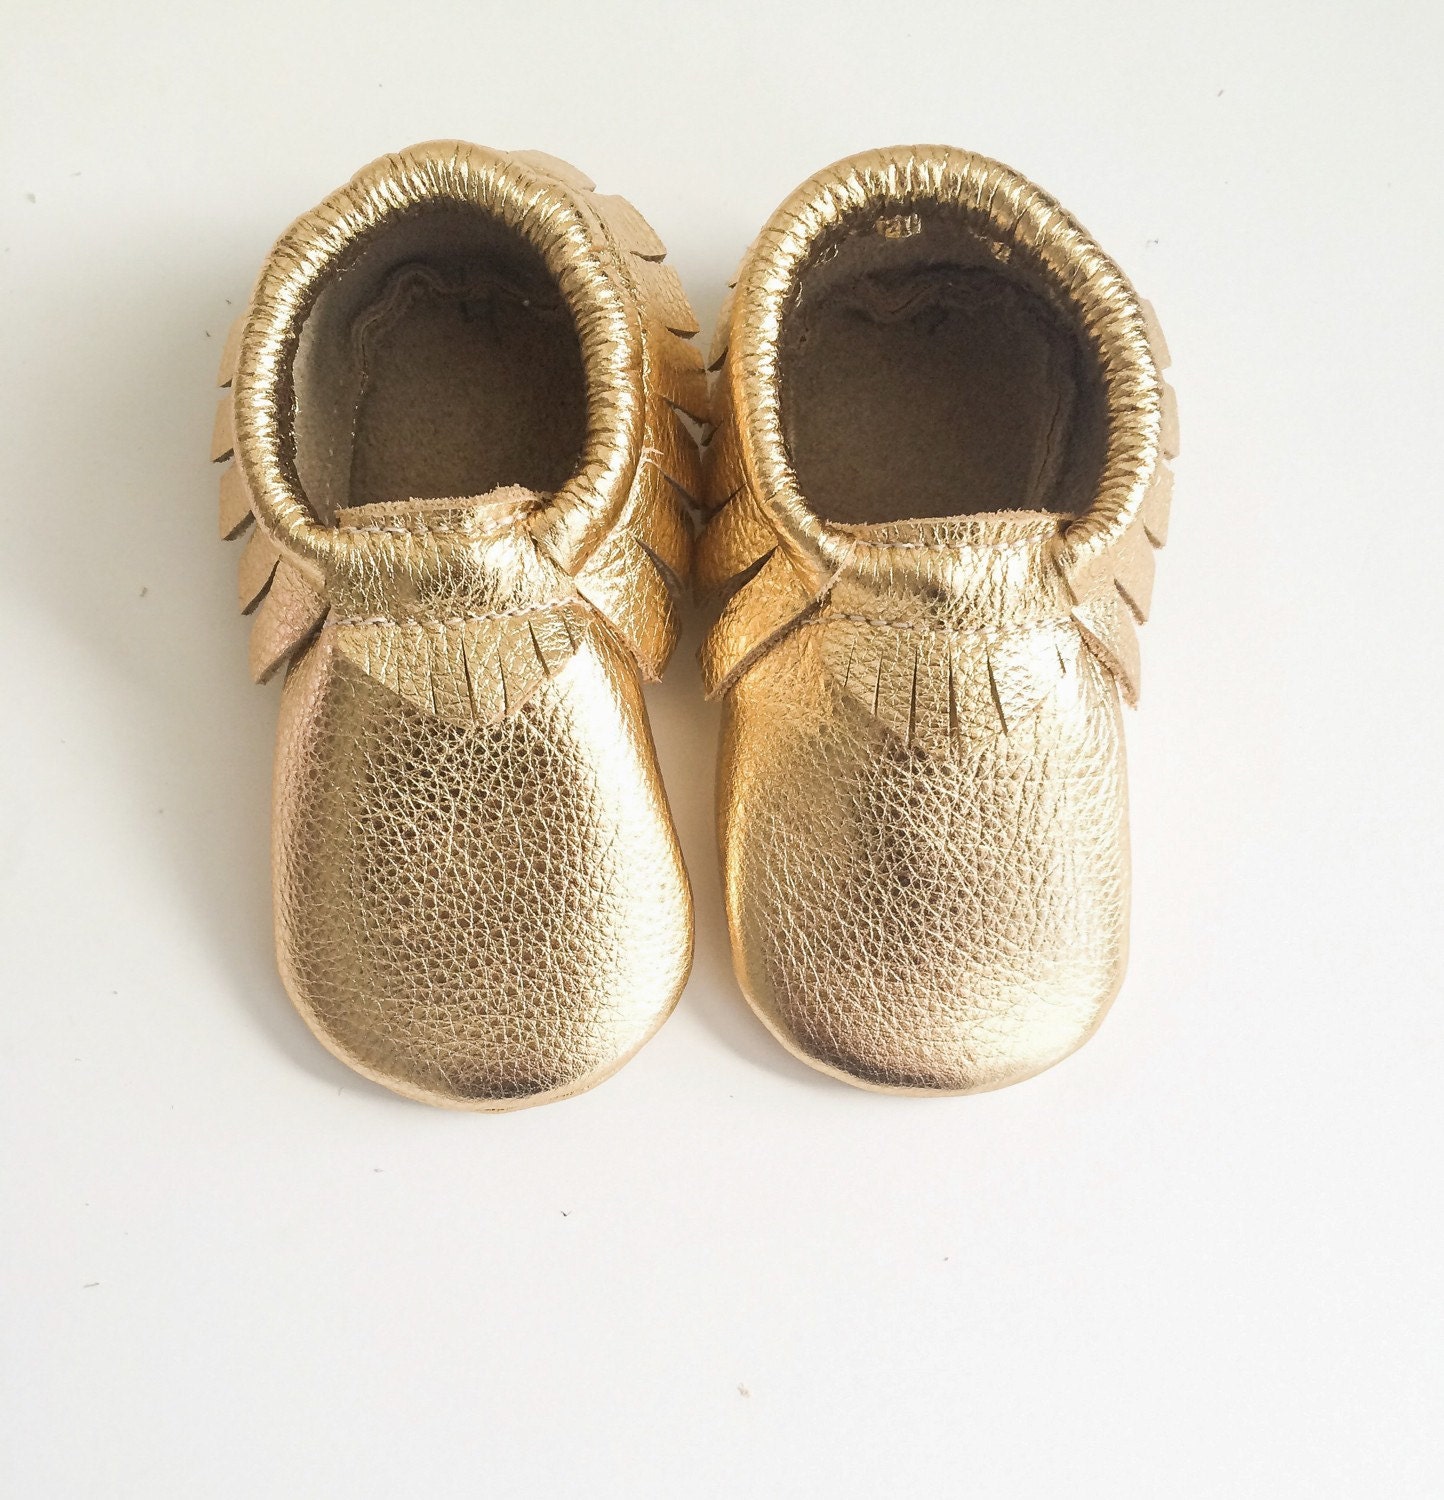 Gold Baby Moccasins Toddler Leather Moccasins by WildExplorers